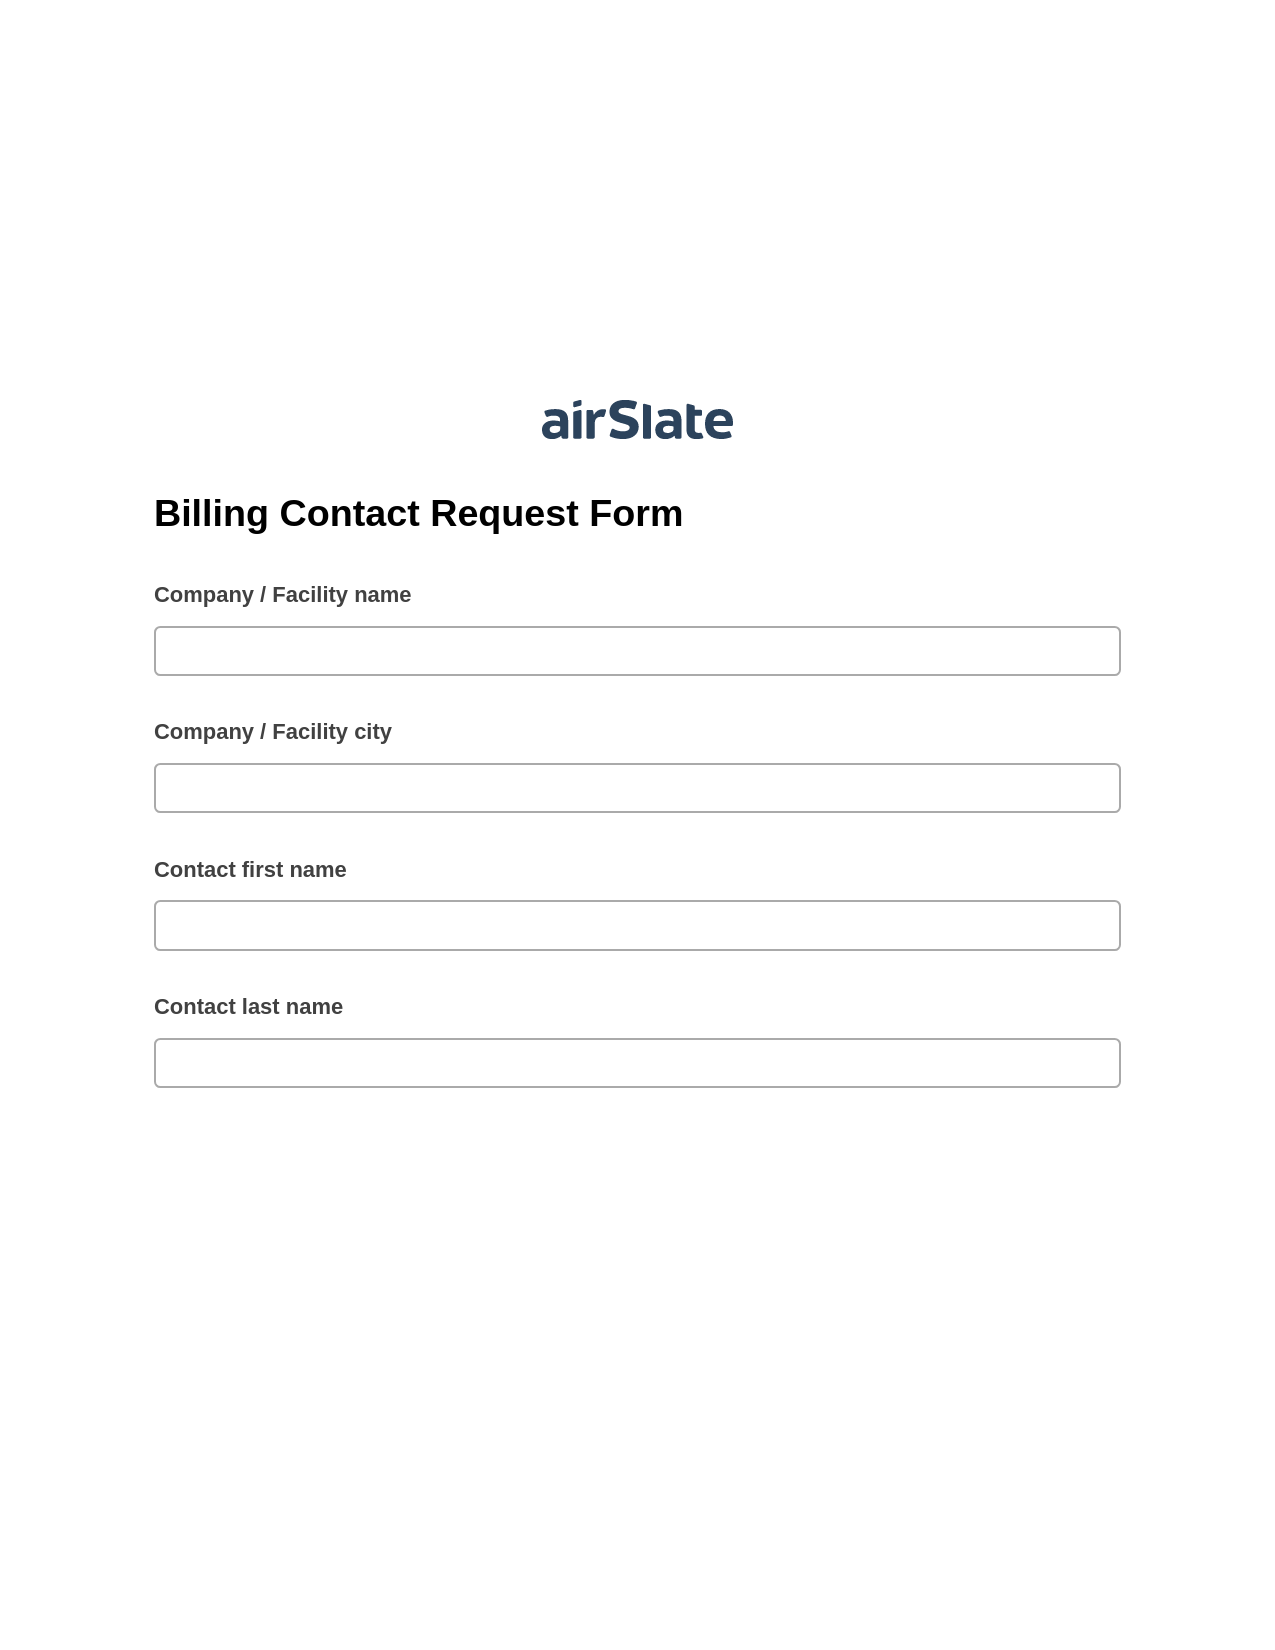 Multirole Billing Contact Request Form Pre-fill Dropdowns from CSV File Bot, Google Sheet Two-Way Binding Bot, Export to Excel 365 Bot